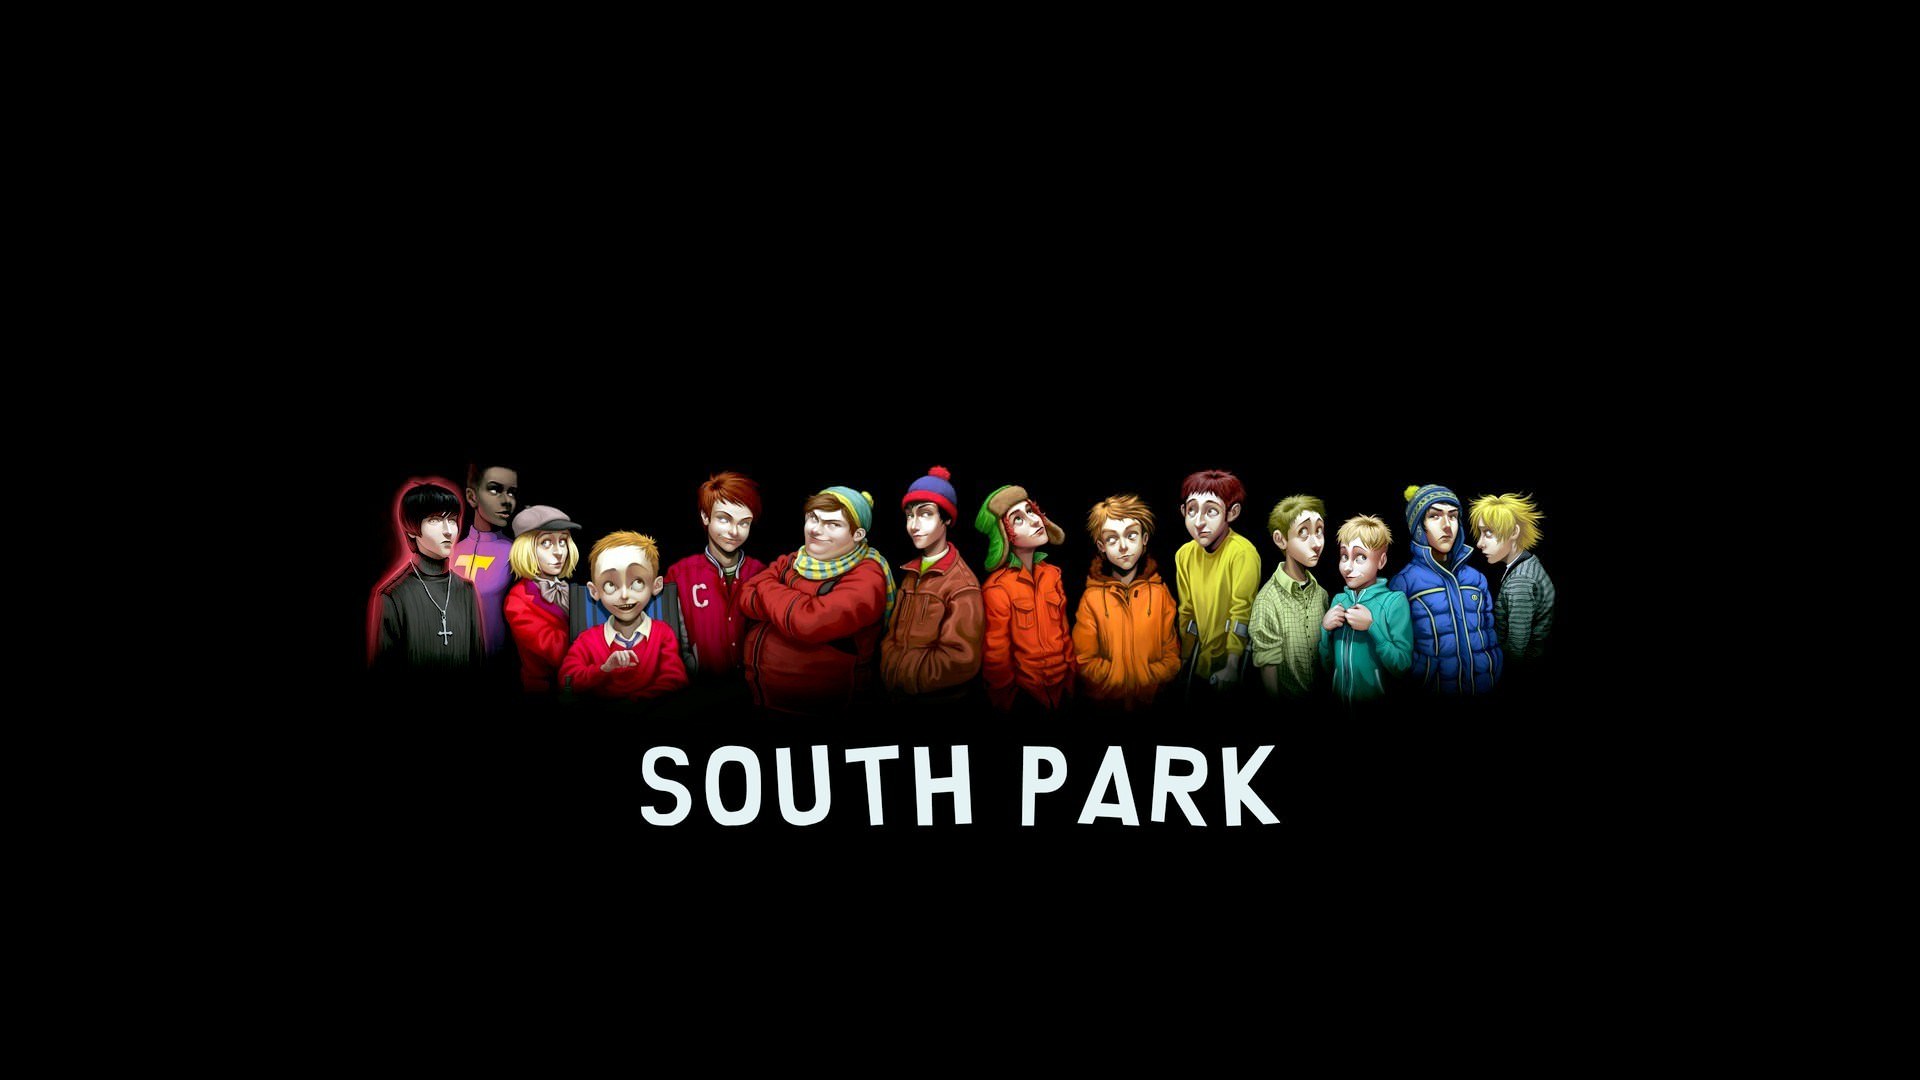 South Park Wallpapers HD classic